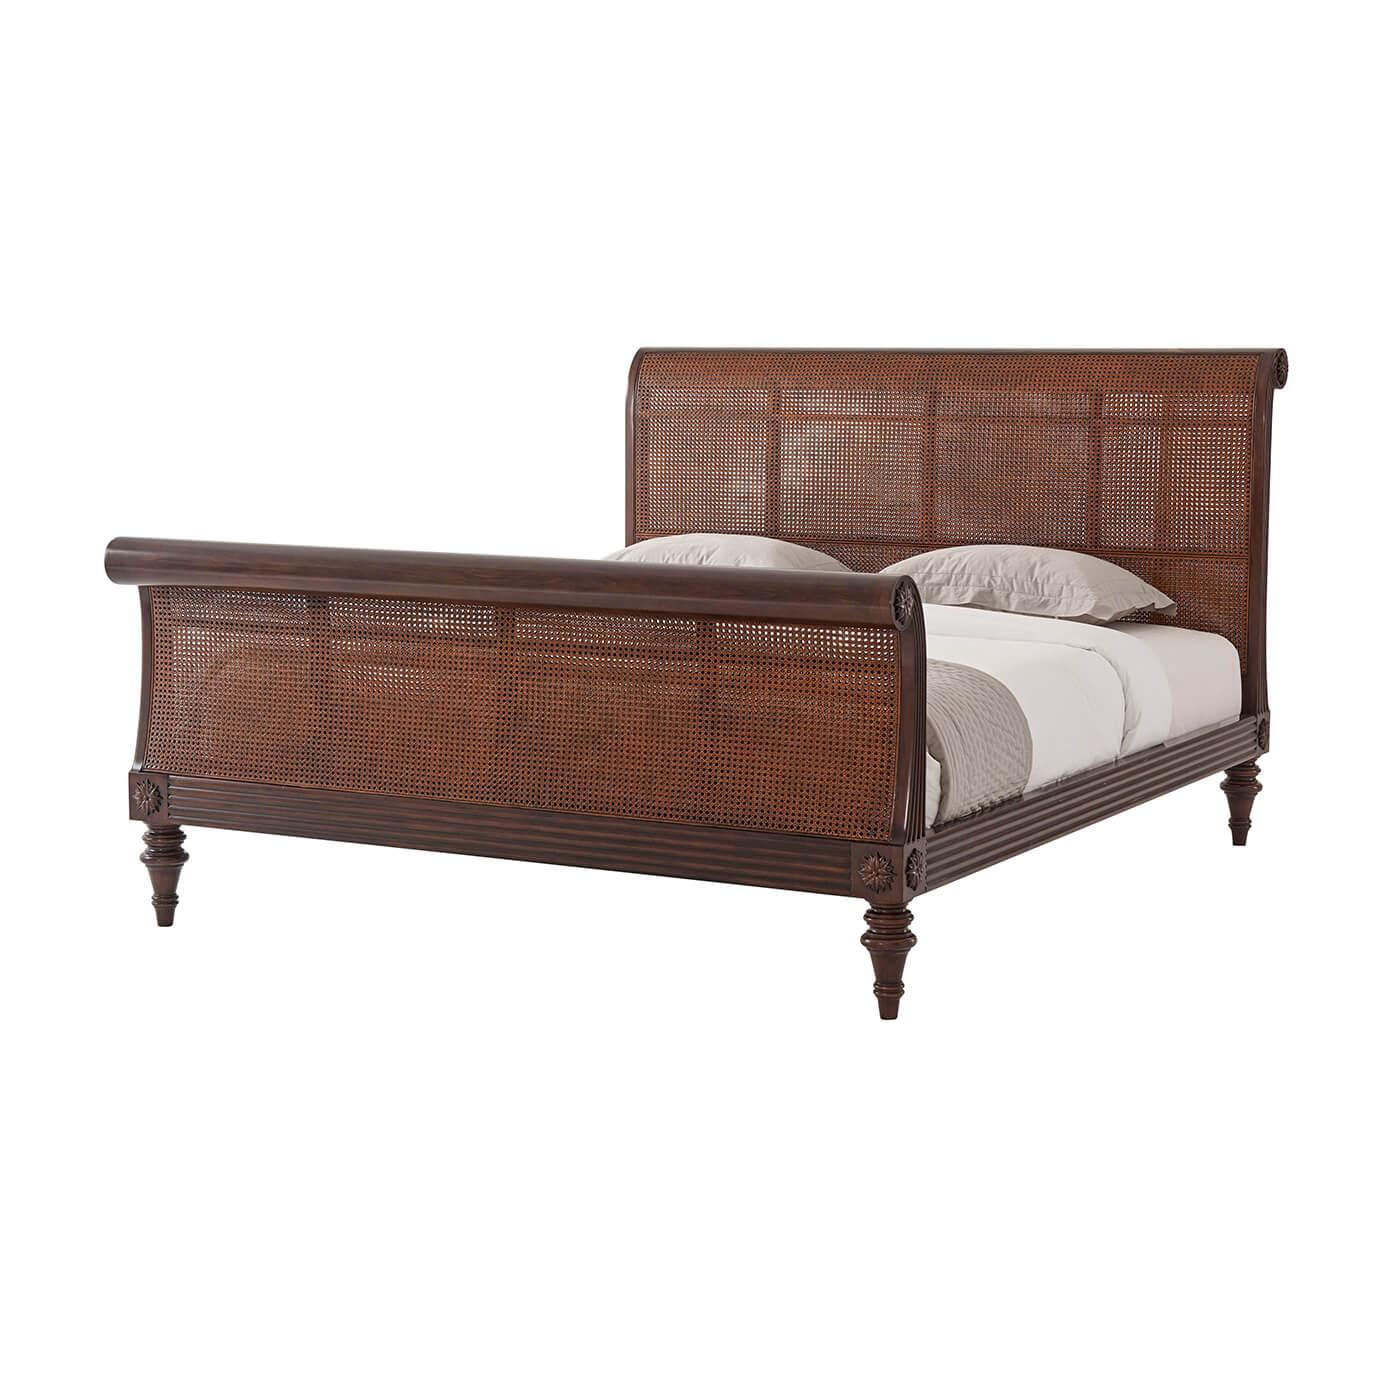 A Regency style Anglo-Indian bed. With a modestly scrolled headboard and footboard with caned panels. Reeded rails, flowerhead carved roundels, scroll carvings and turned tapered legs add authenticity and charm.

Shown in Cambridge Finish
For CAL.